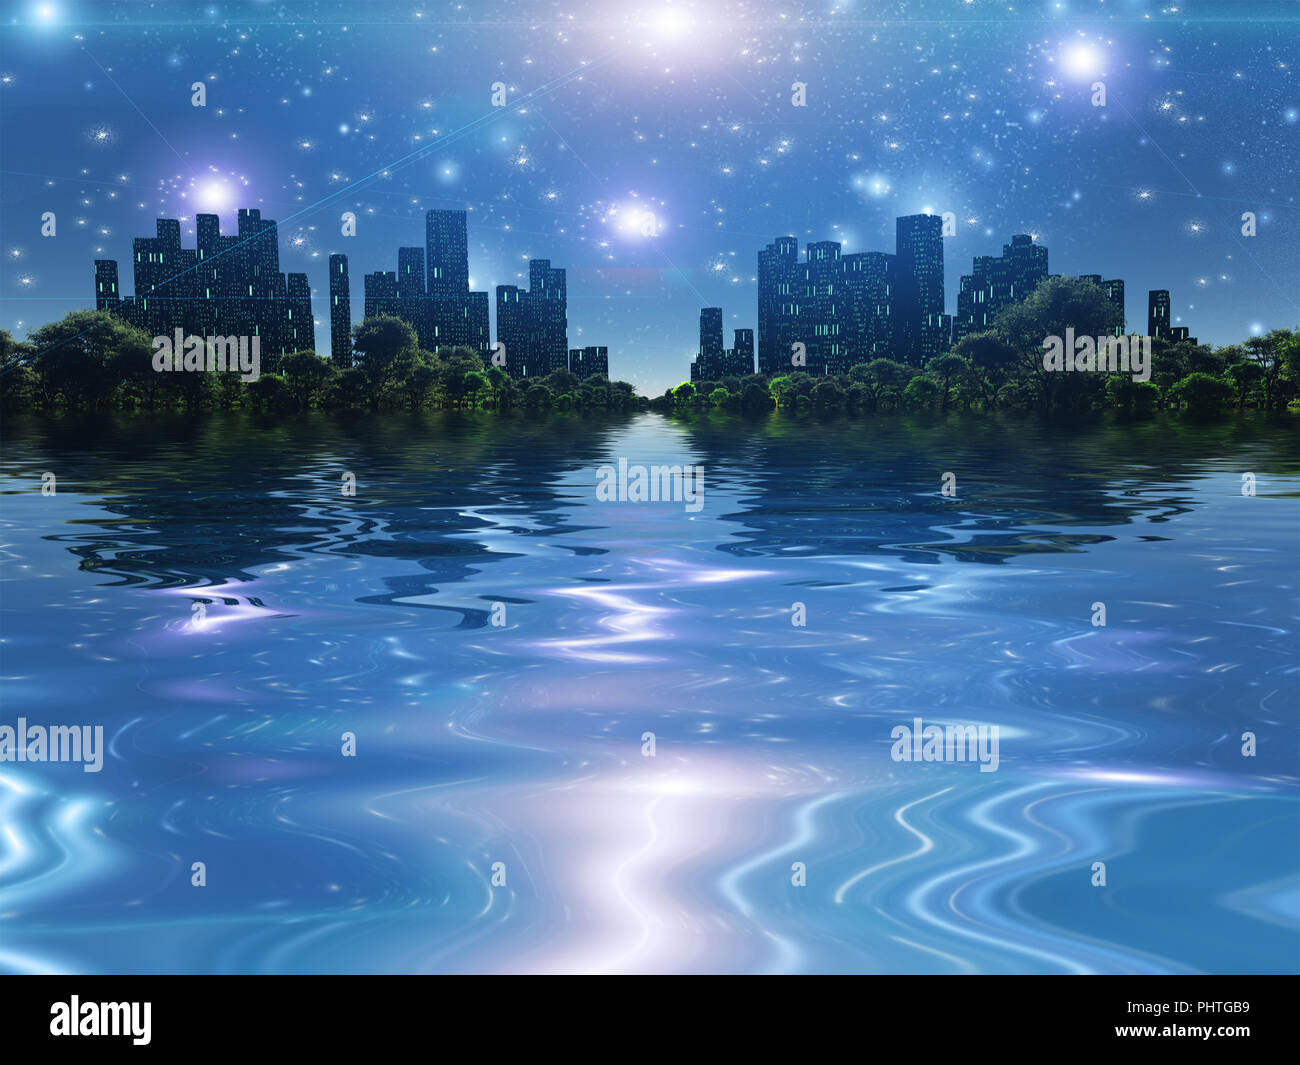 Surreal digital art. City surrounded by green trees in water world